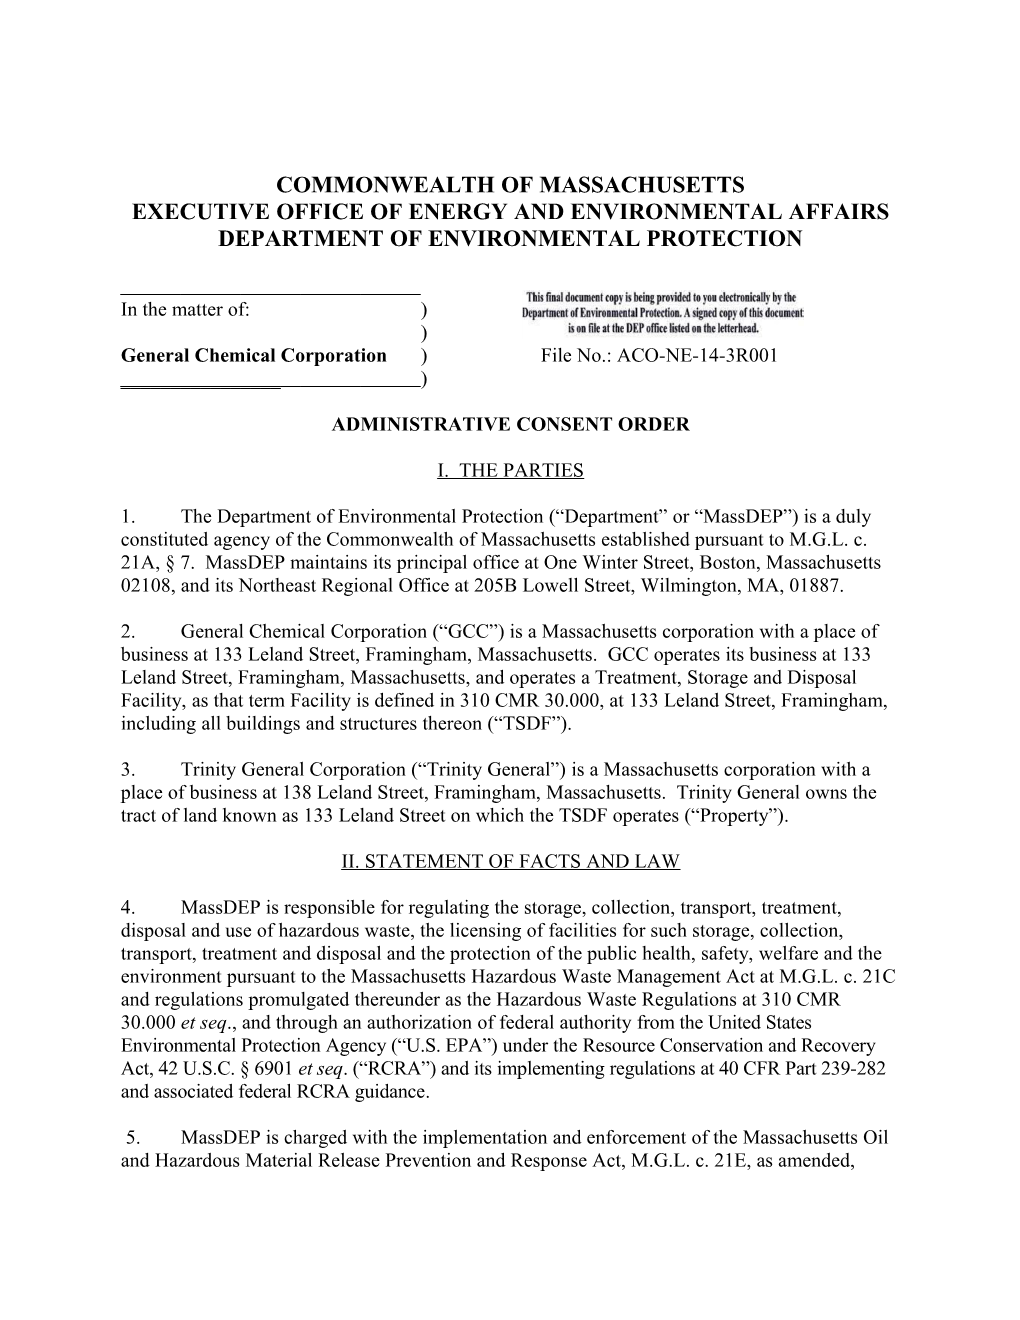 Administrative Consent Order General Chemical Corporation